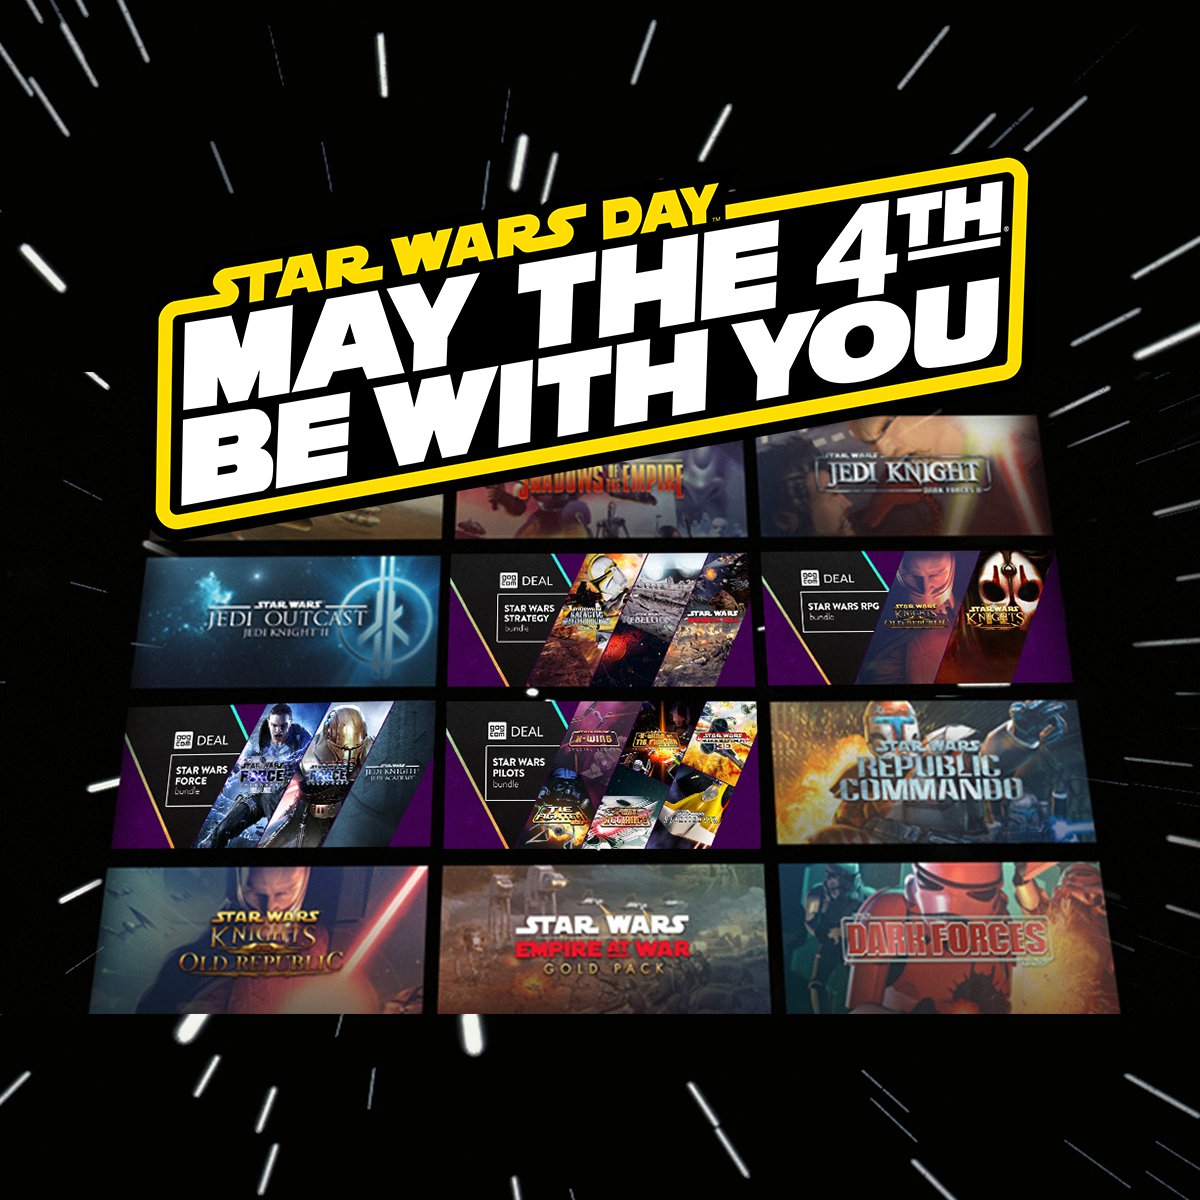 Tonight we vacate Earth ✨ Happy Star Wars Day, go get some classic DRM-free games! bit.ly/May4thGOG